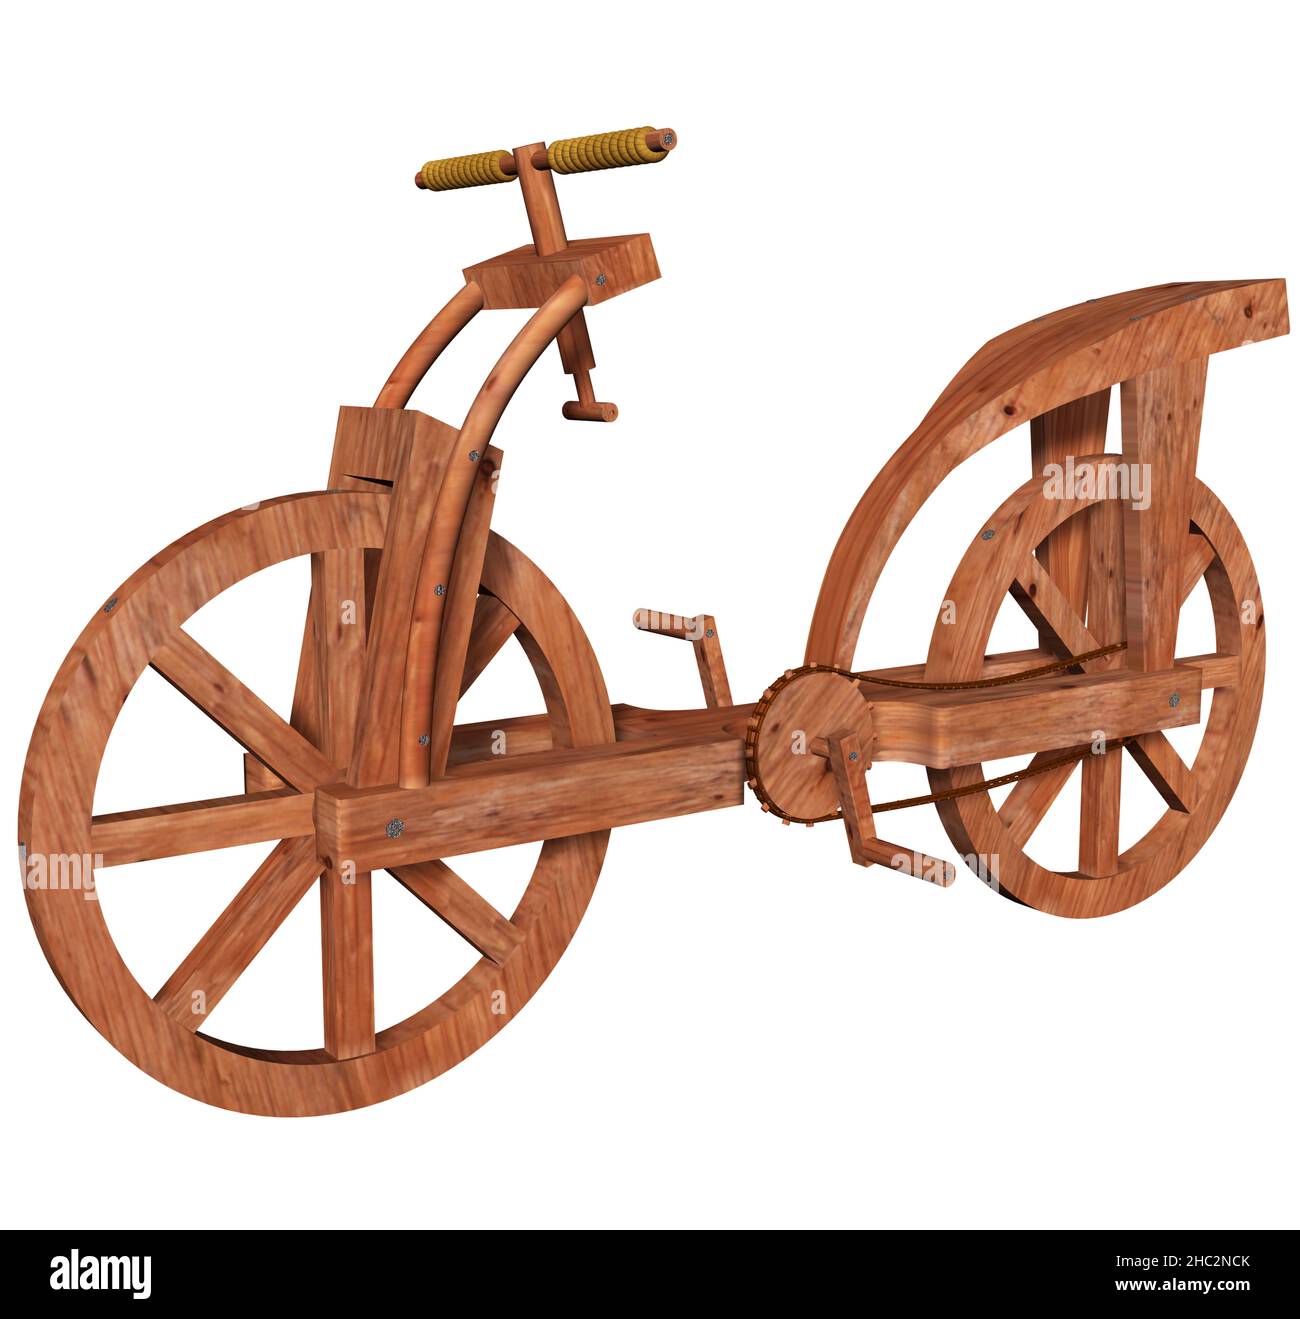 3D Rendering Illustration of a Bicycle Prototype, desing and created by Leonardo da Vinci in the Codex Atlanticus. Stock Photo